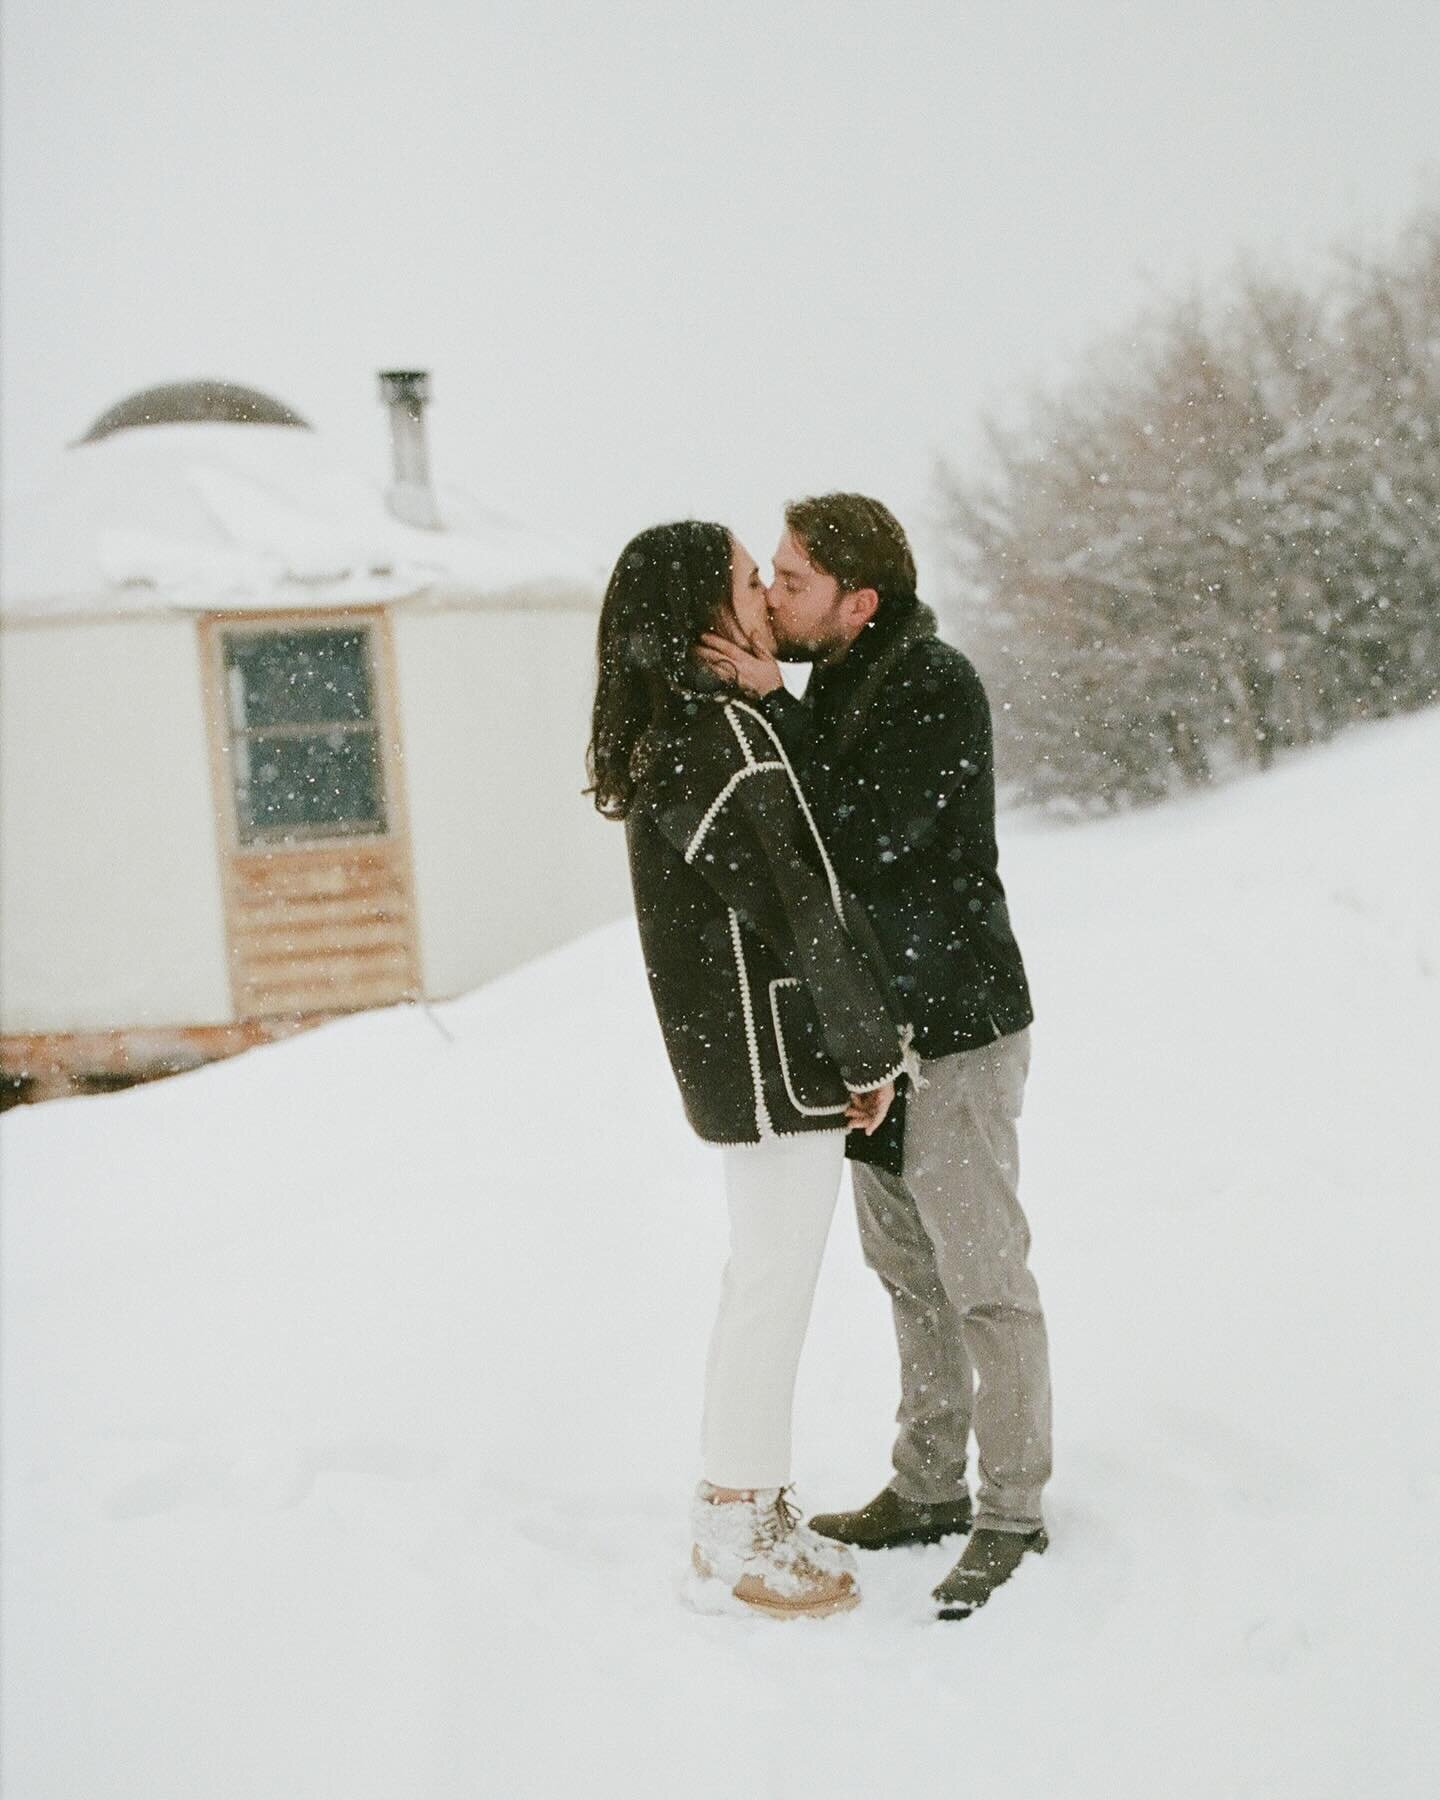 Kate + Stuart in what felt like a snow globe. 

Engagement photos to celebrate their love of winter, snow, and skiing. Wedding in this same spot during the transition from summer to fall, as the leaves change and sun sets low in the sky. We can&rsquo